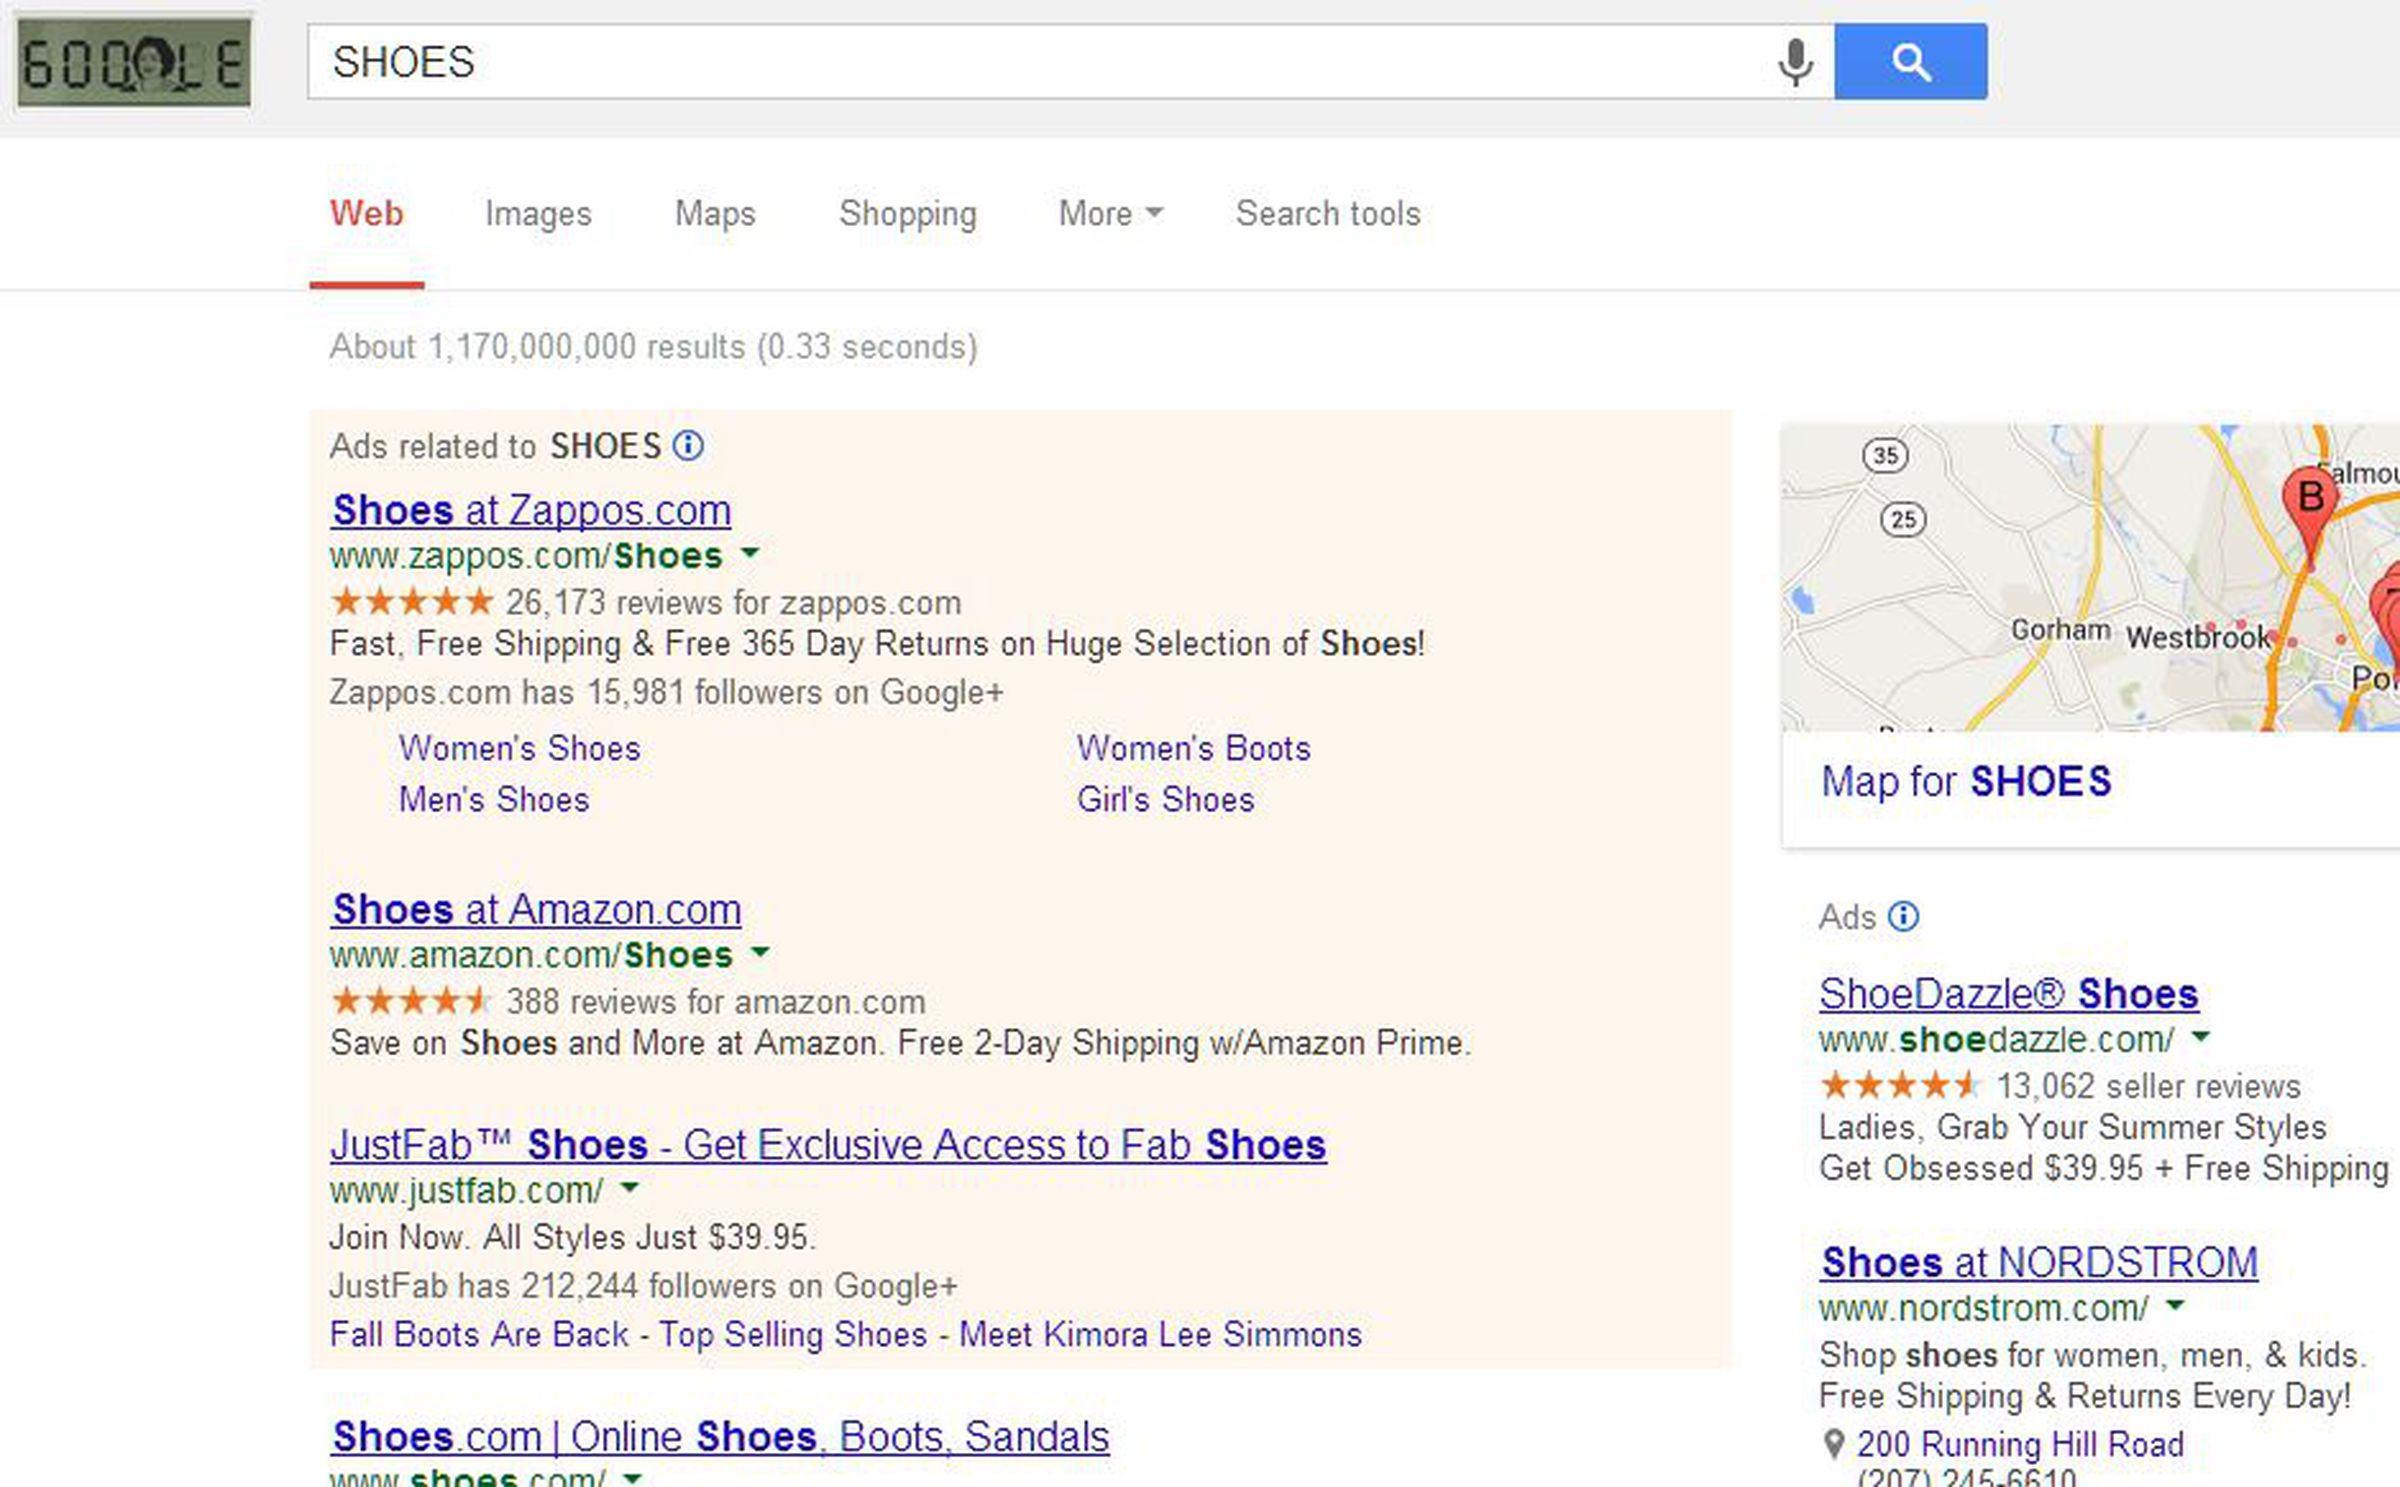 In the past, Google used to give its ads a different background color to make them distinct from the rest of its results. This screenshot is from 2013.